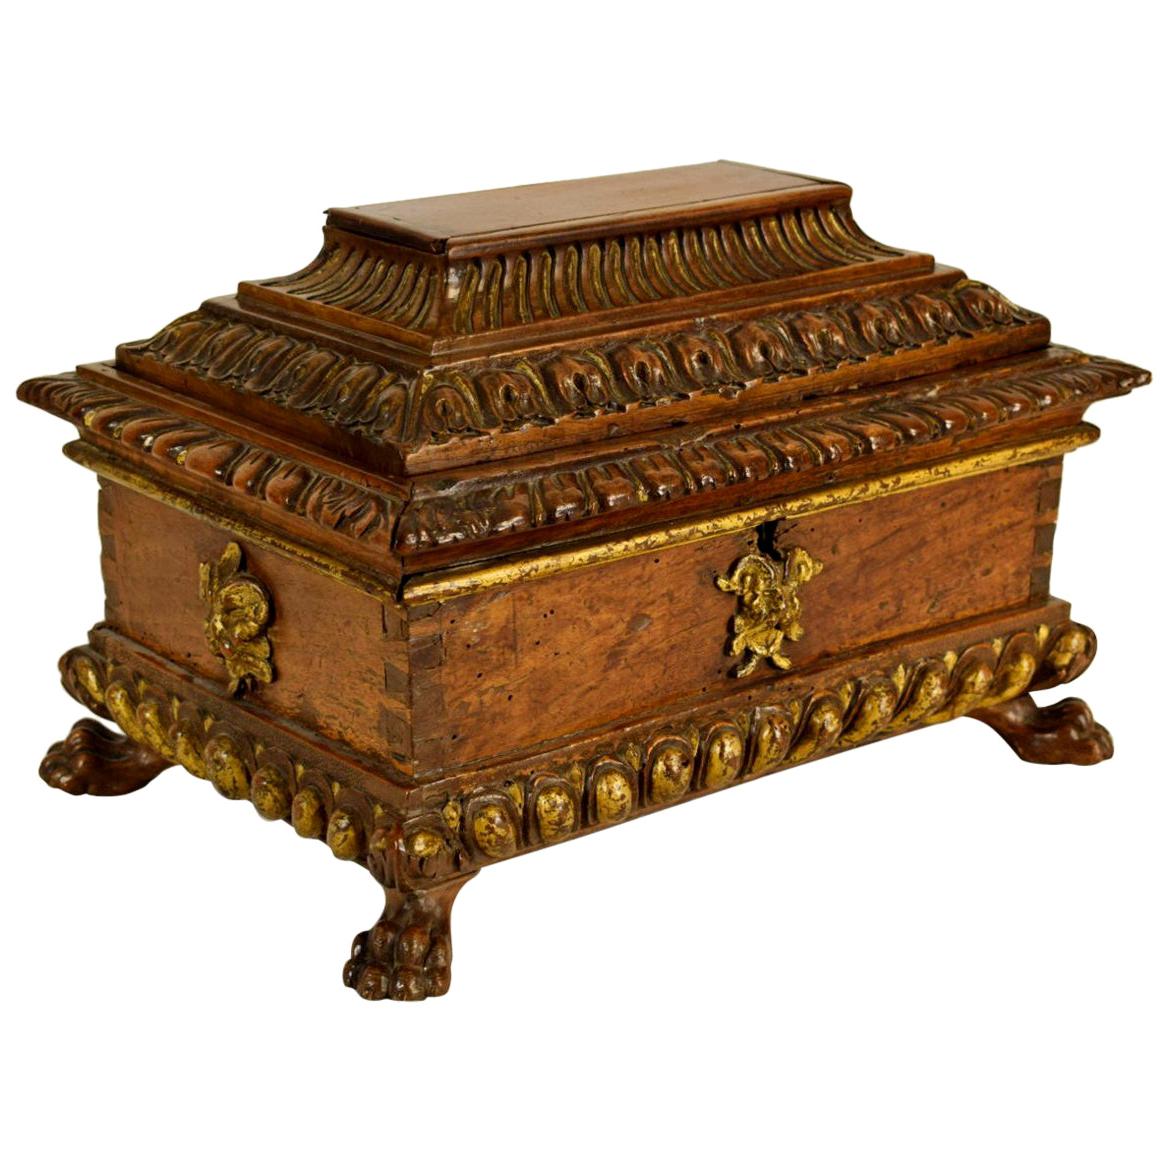 16th Century Tuscany Carved and Gilded Wood Box